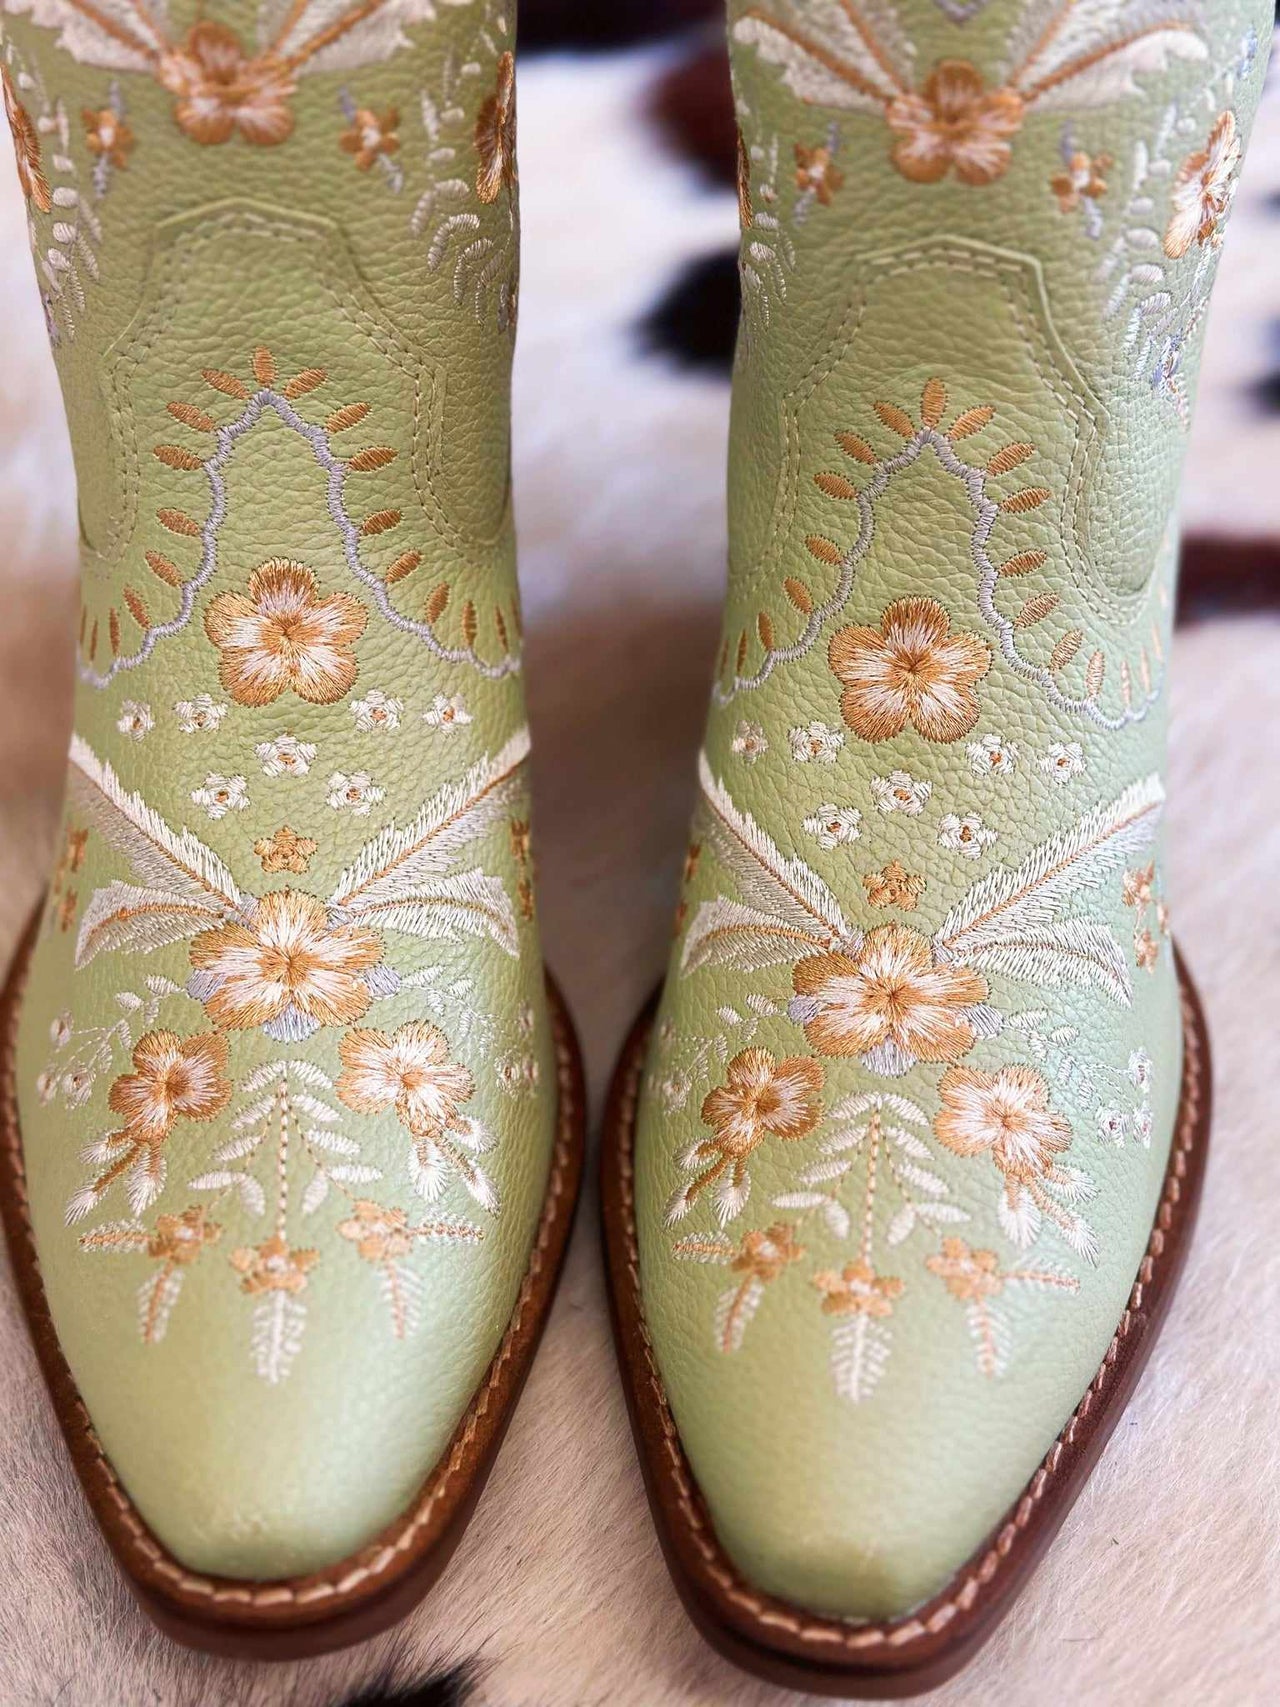 Prim Rose Bootie by Dingo from Dan Post - Mint